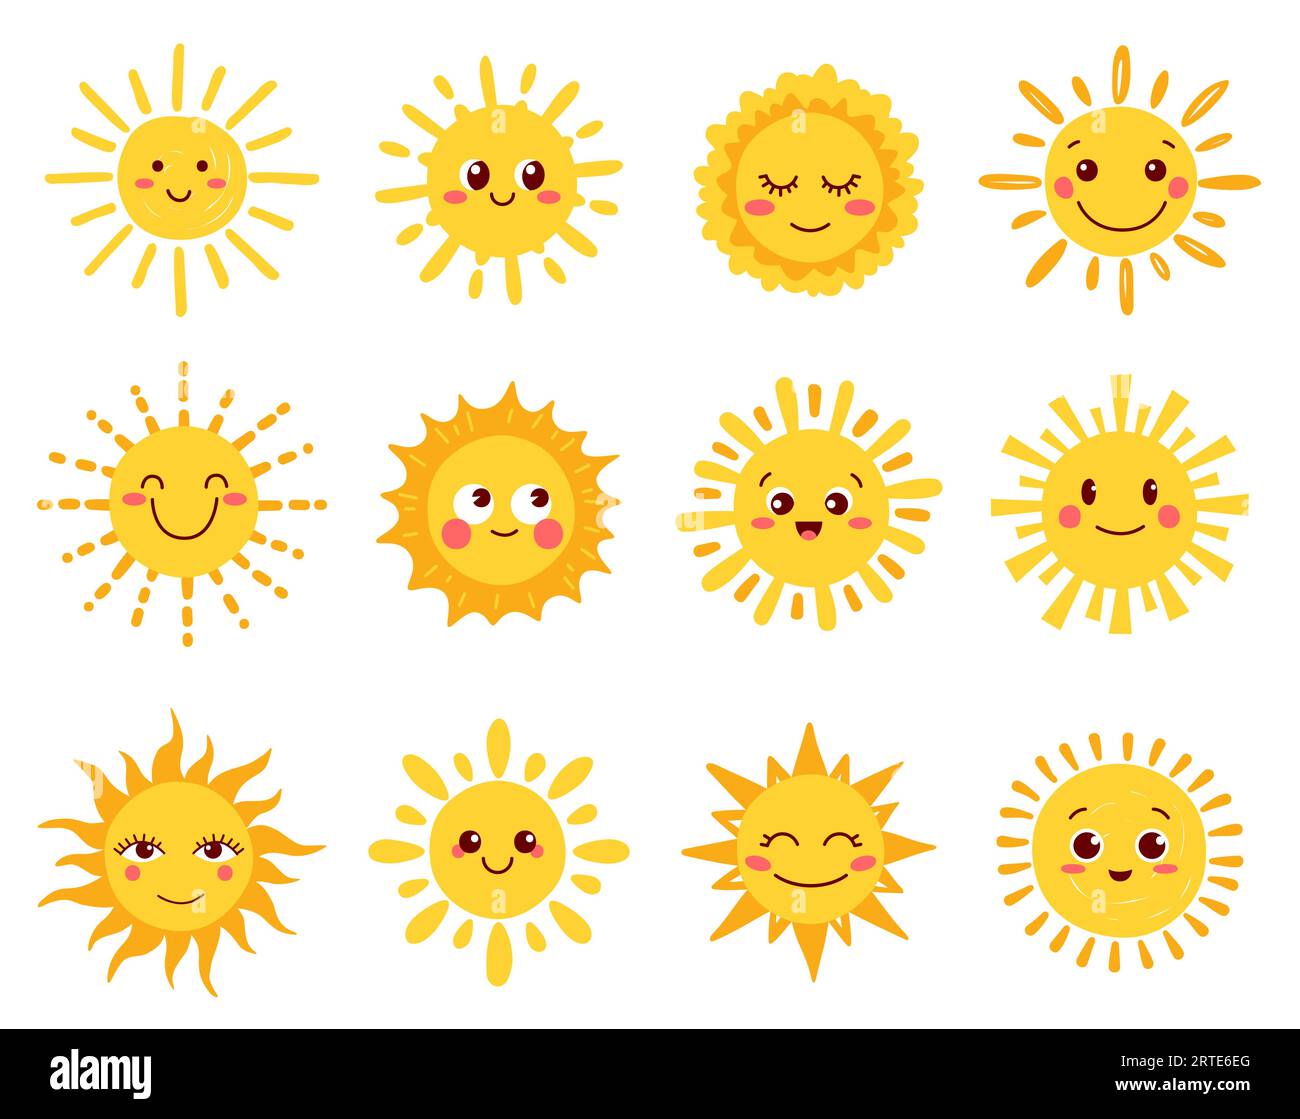 Sun characters, cartoon sunny faces and cute happy summer smiles, vector icon. Sun characters or sunshine, weather, fun emoji of funny hot yellow suns with smile expression and blush shine Stock Vector